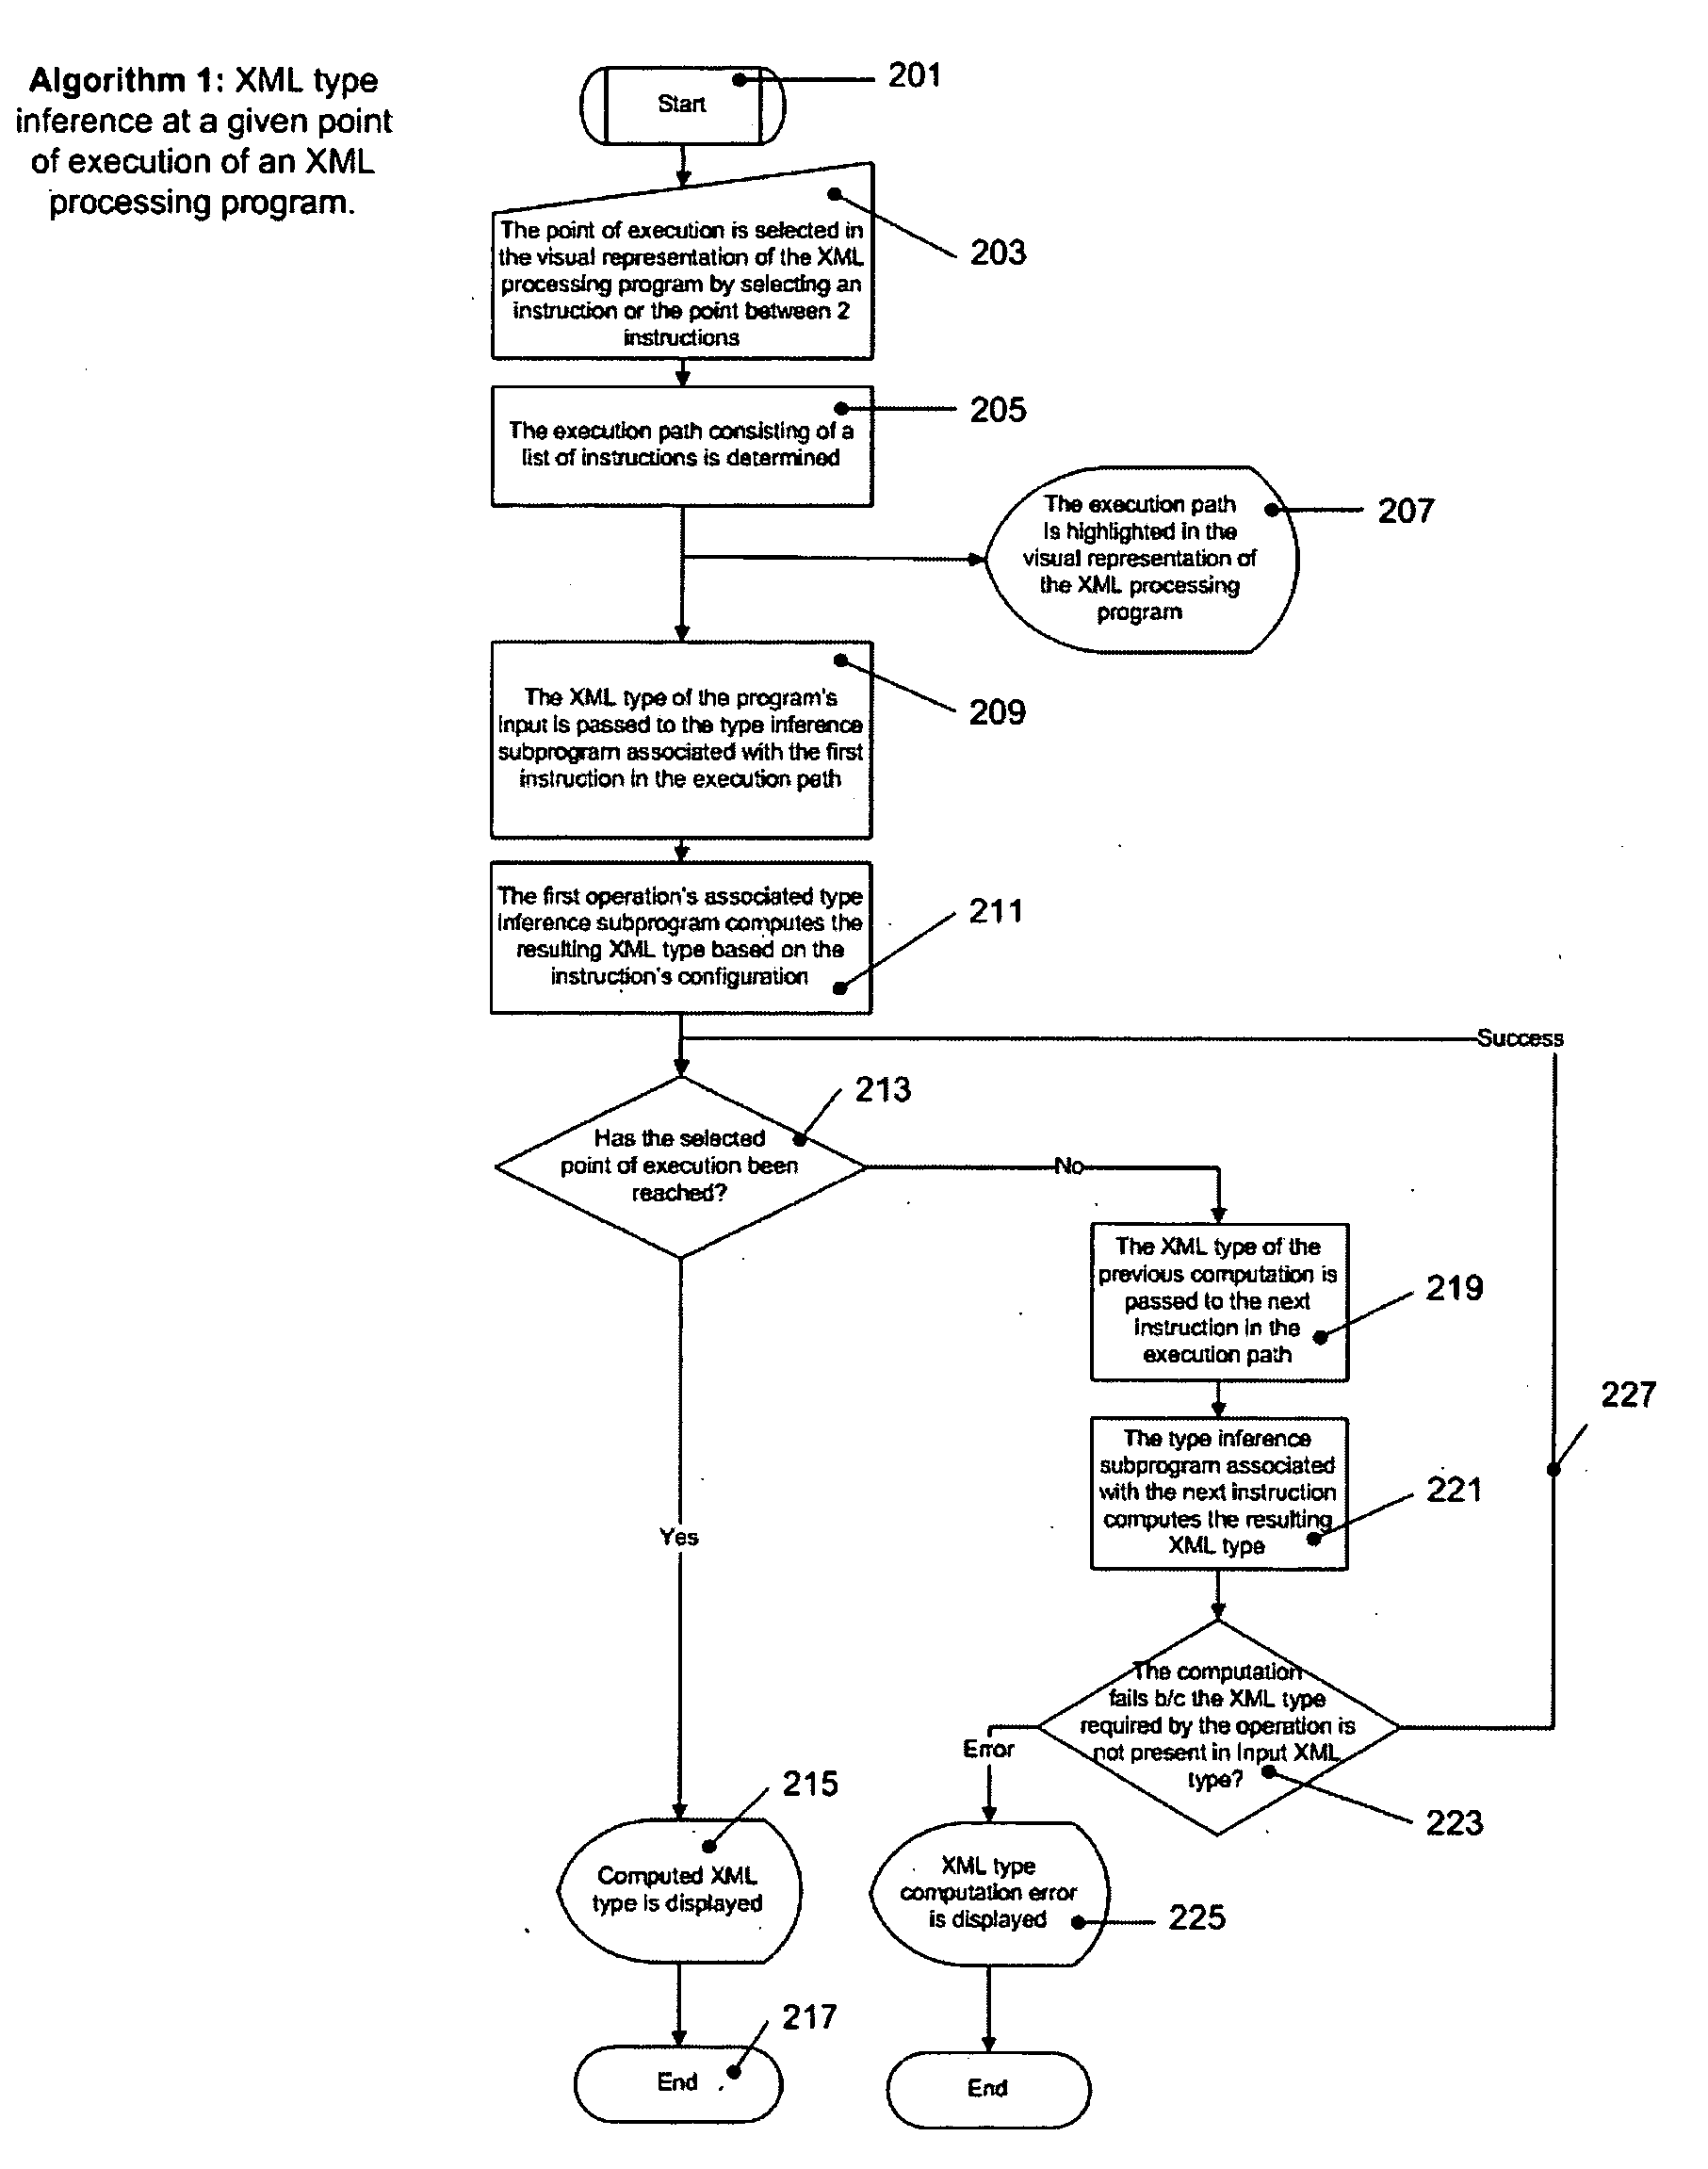 Graphical XML programming system and engine where XML processing programs are built and represented in a graphical fashion